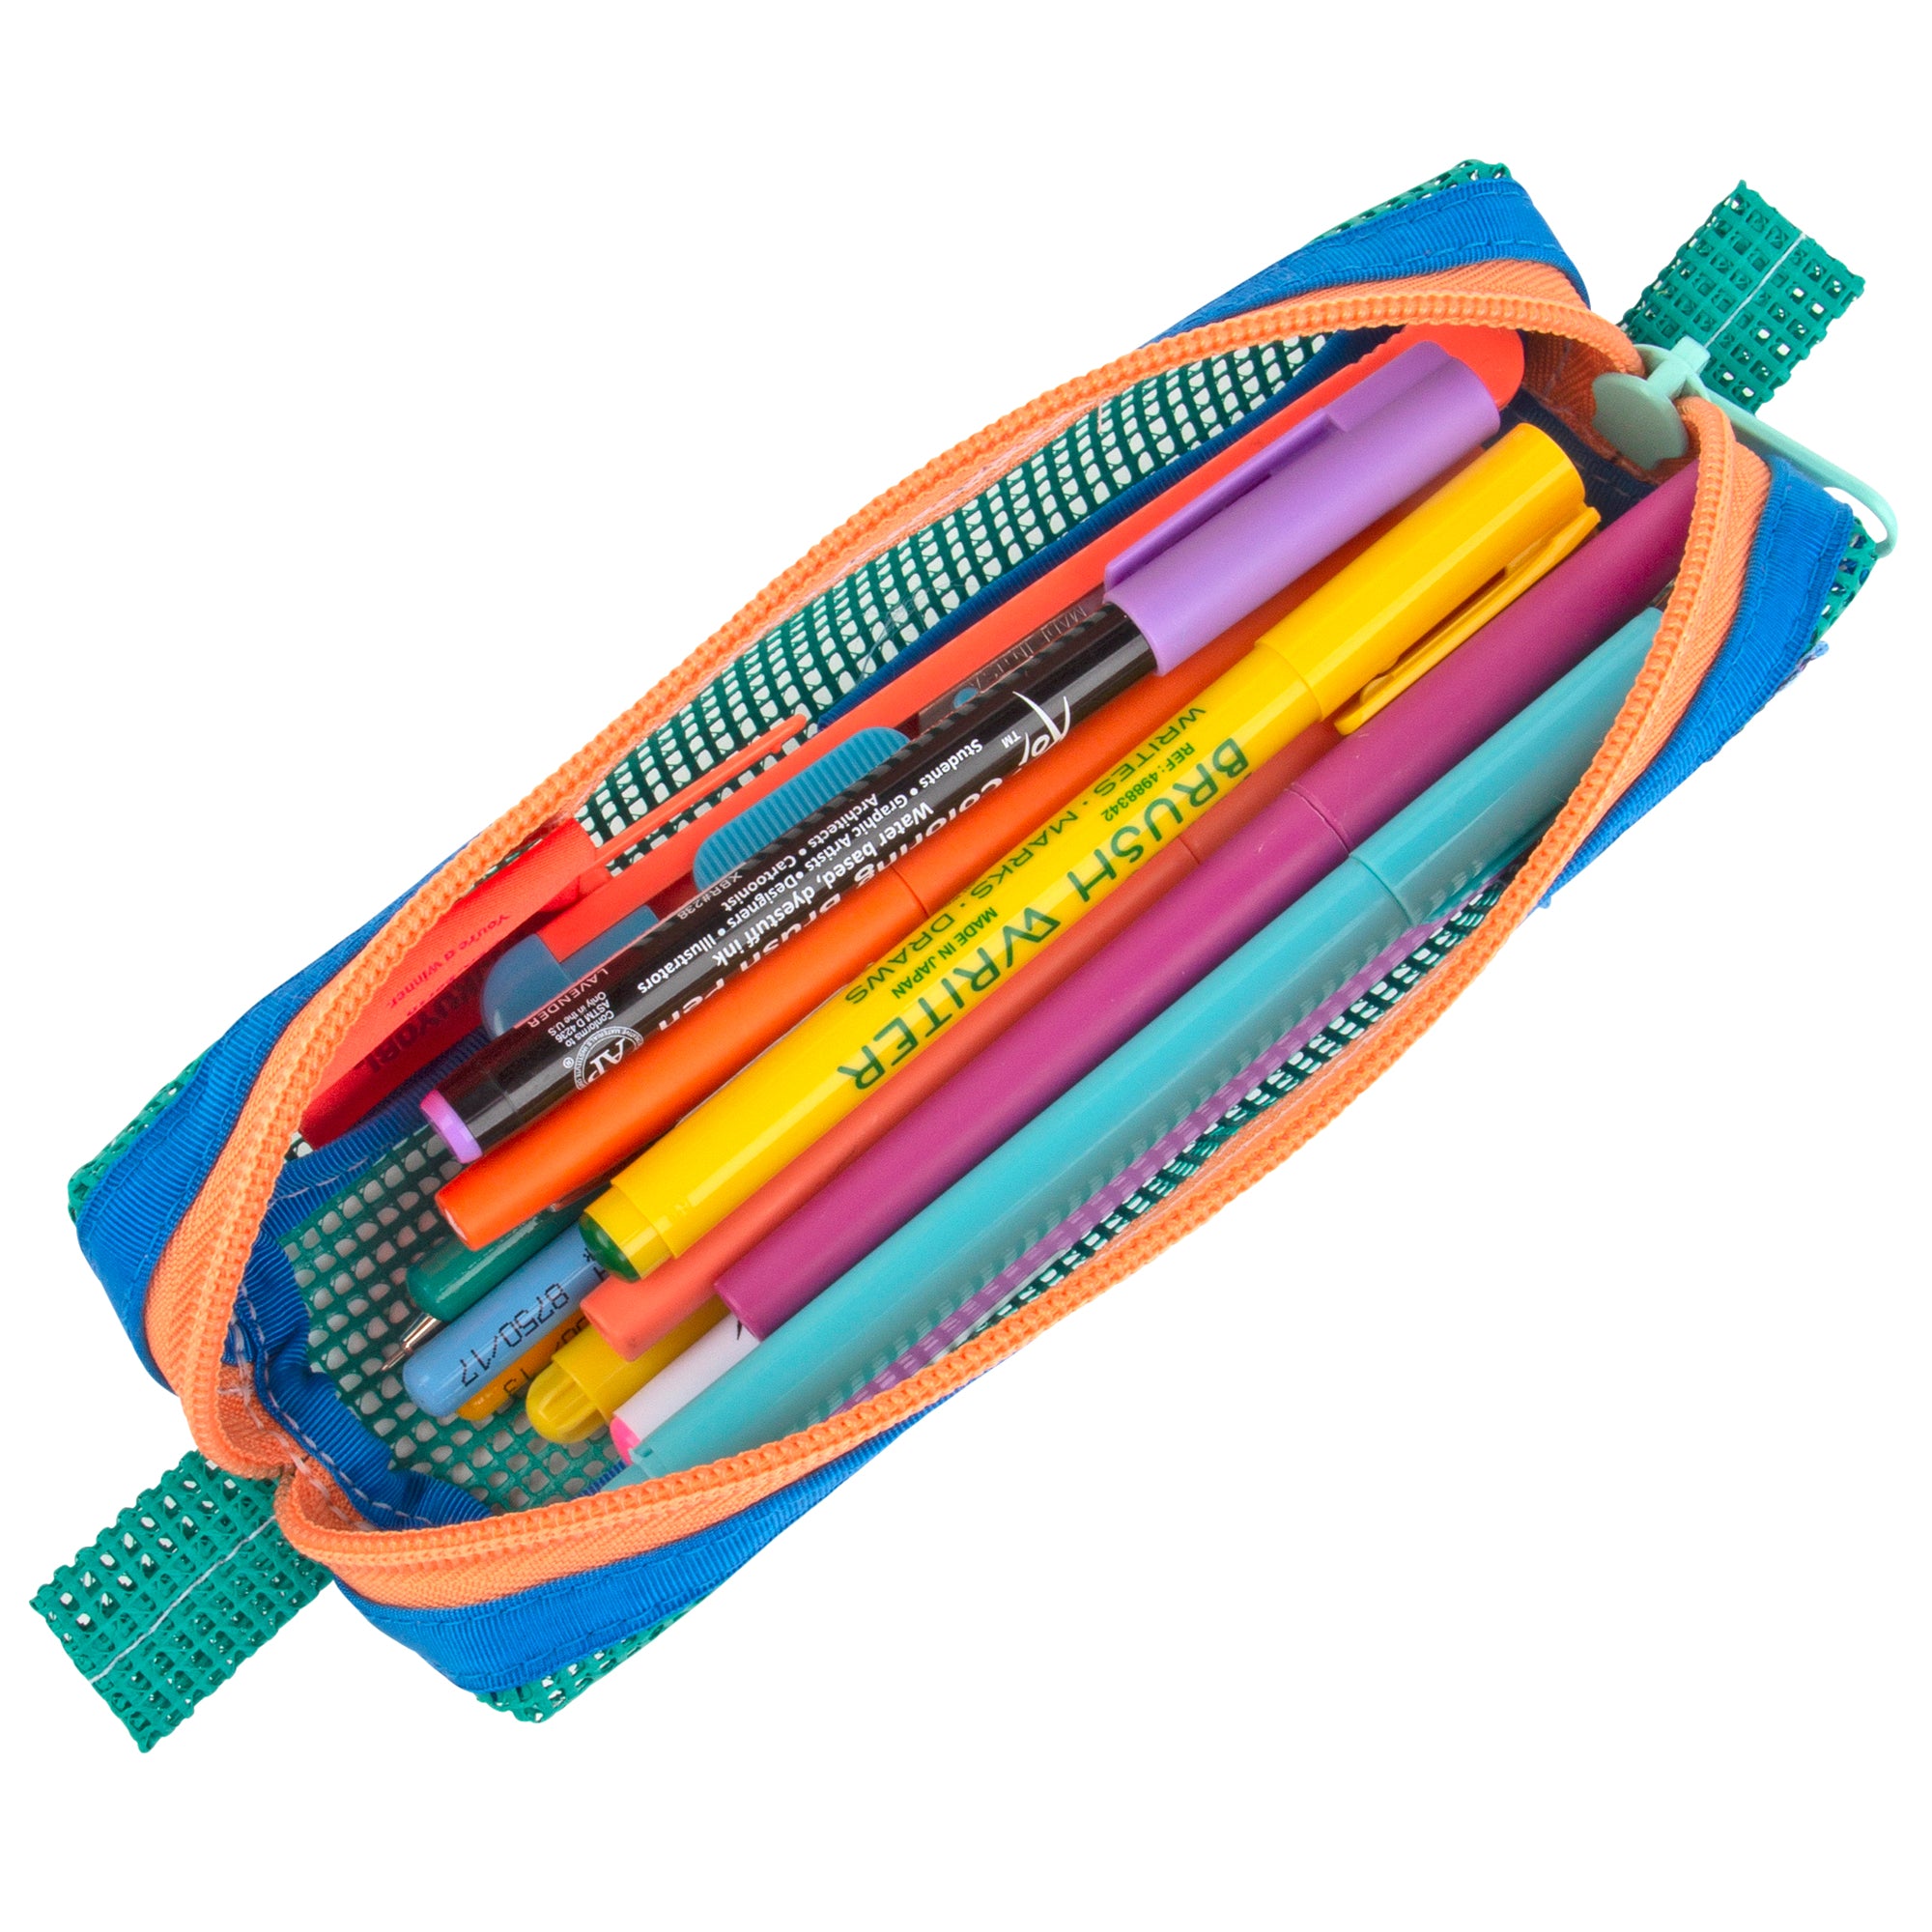 Best Mesh Pencil Cases for Storing Drawing and Writing Tools –